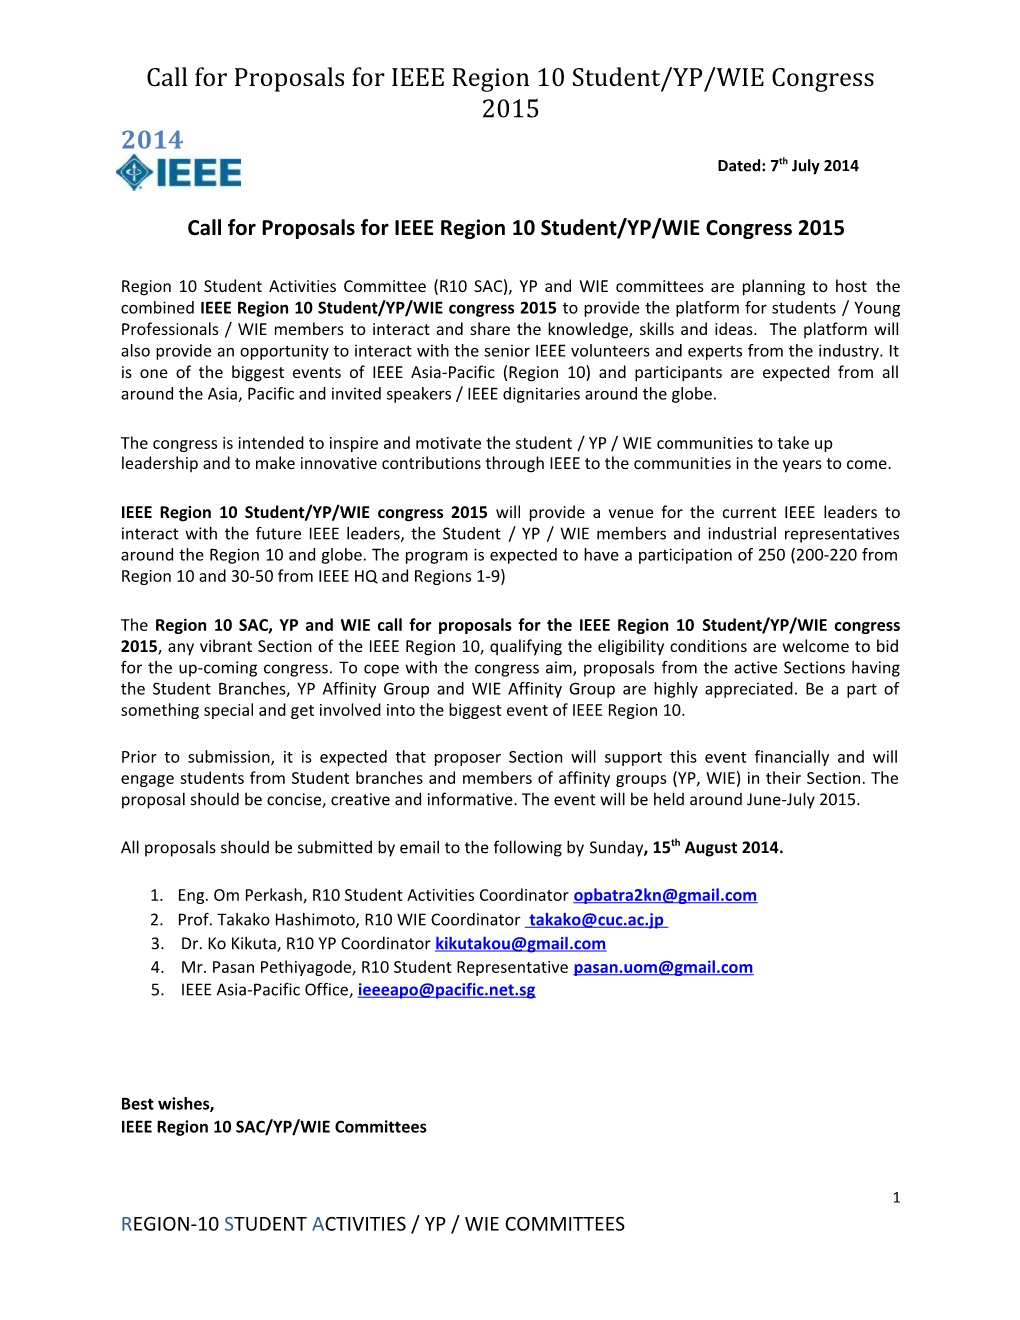 Call for Proposals for IEEE Region 10 Student/GOLD/WIE Congress 2013